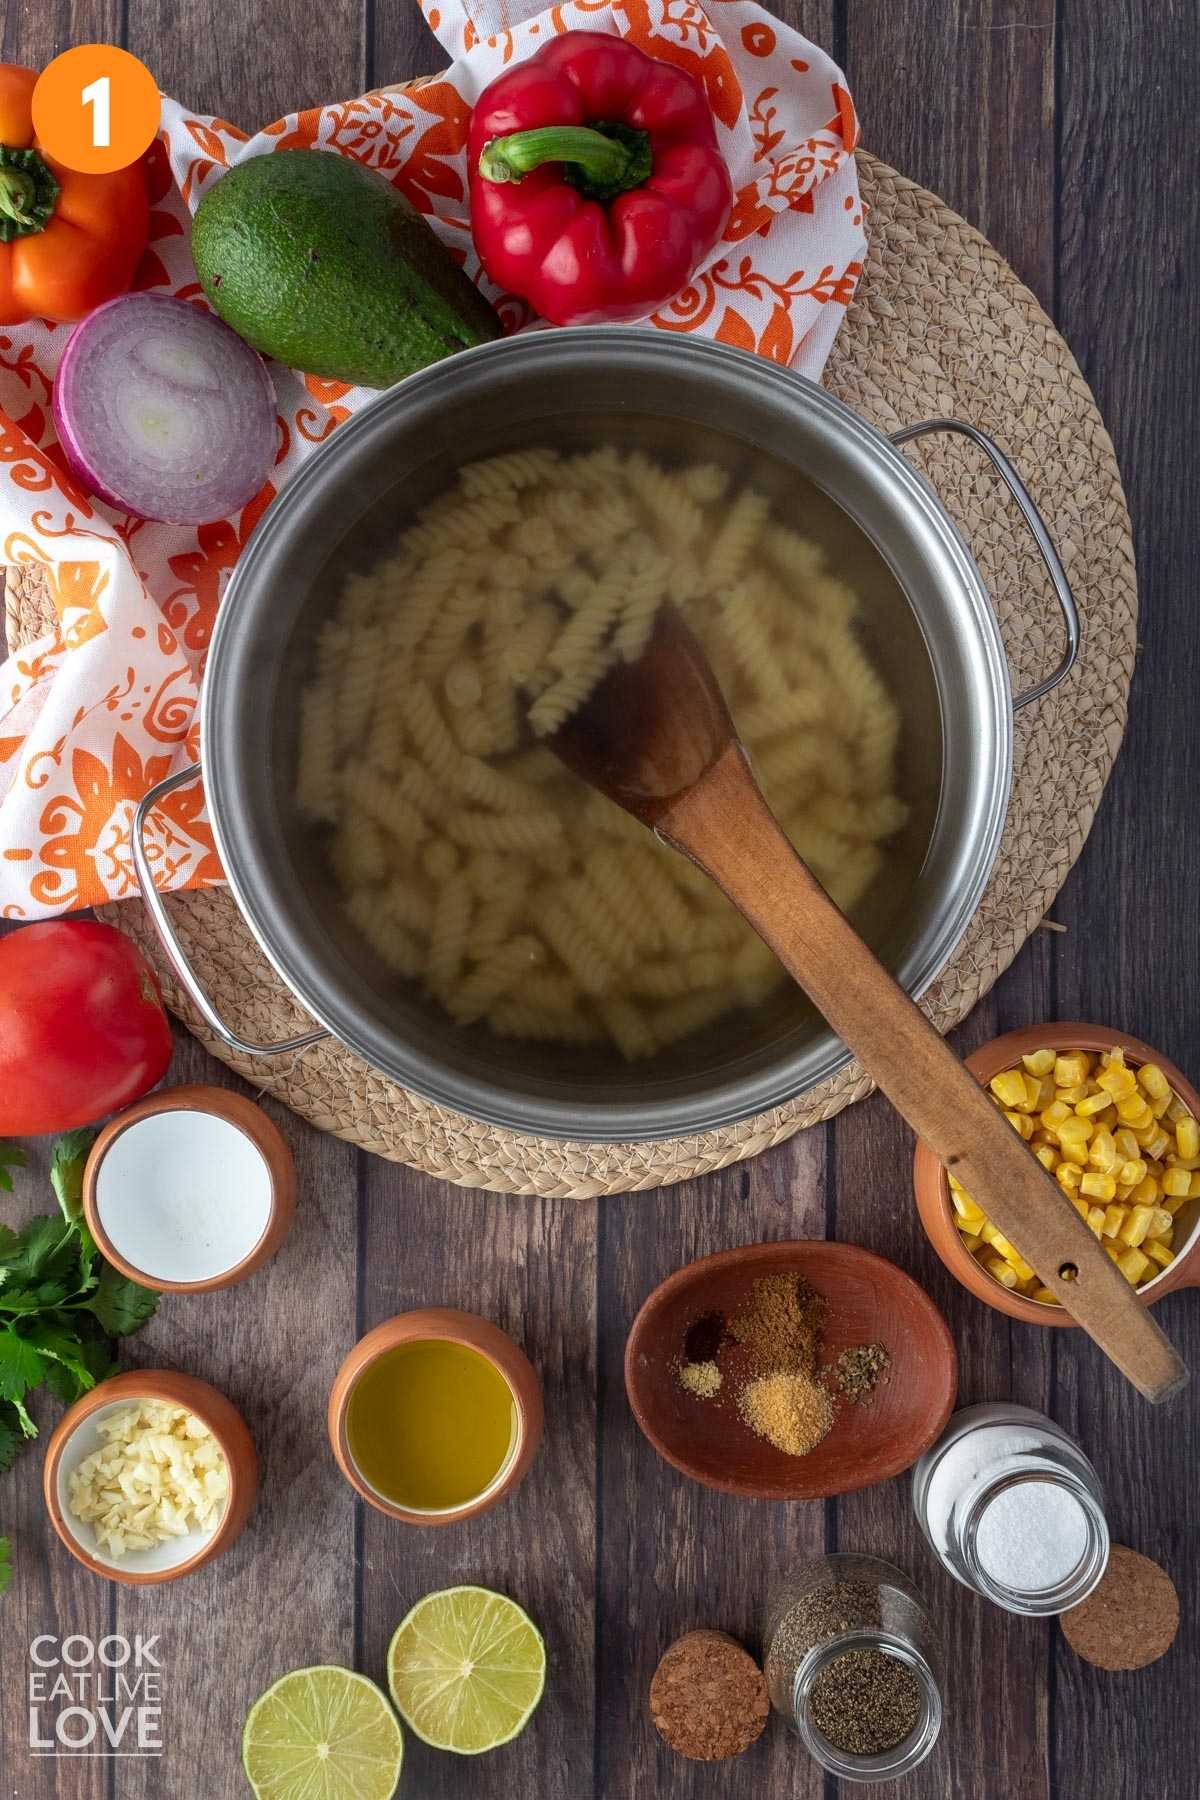 Pasta cooking in a pot.